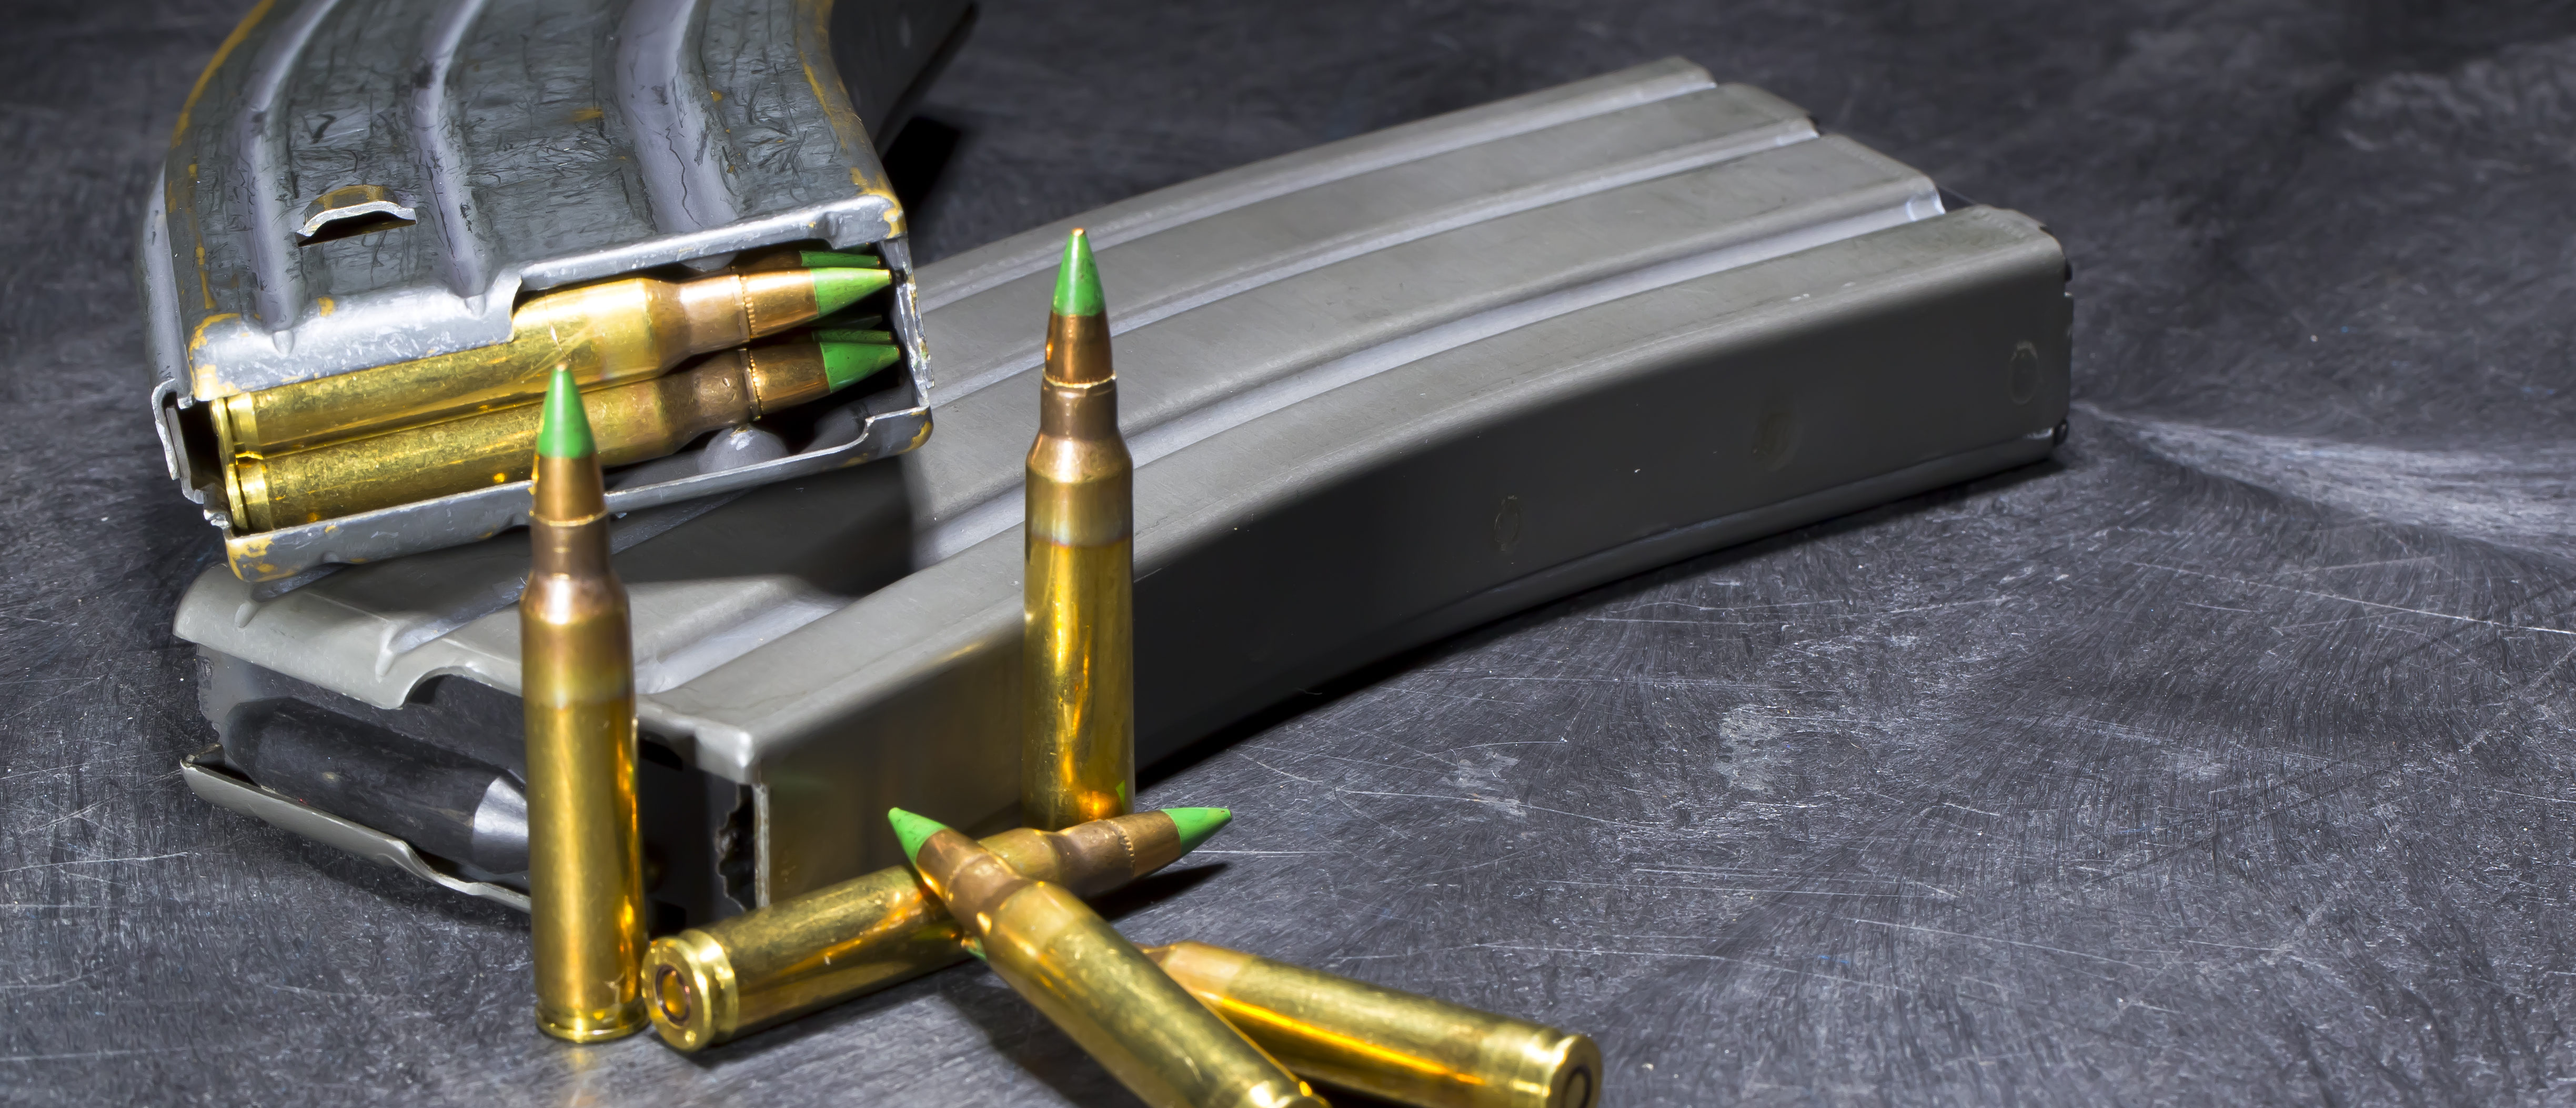 Colorado Supreme Court Upholds Law Banning Magazines Greater Than 15